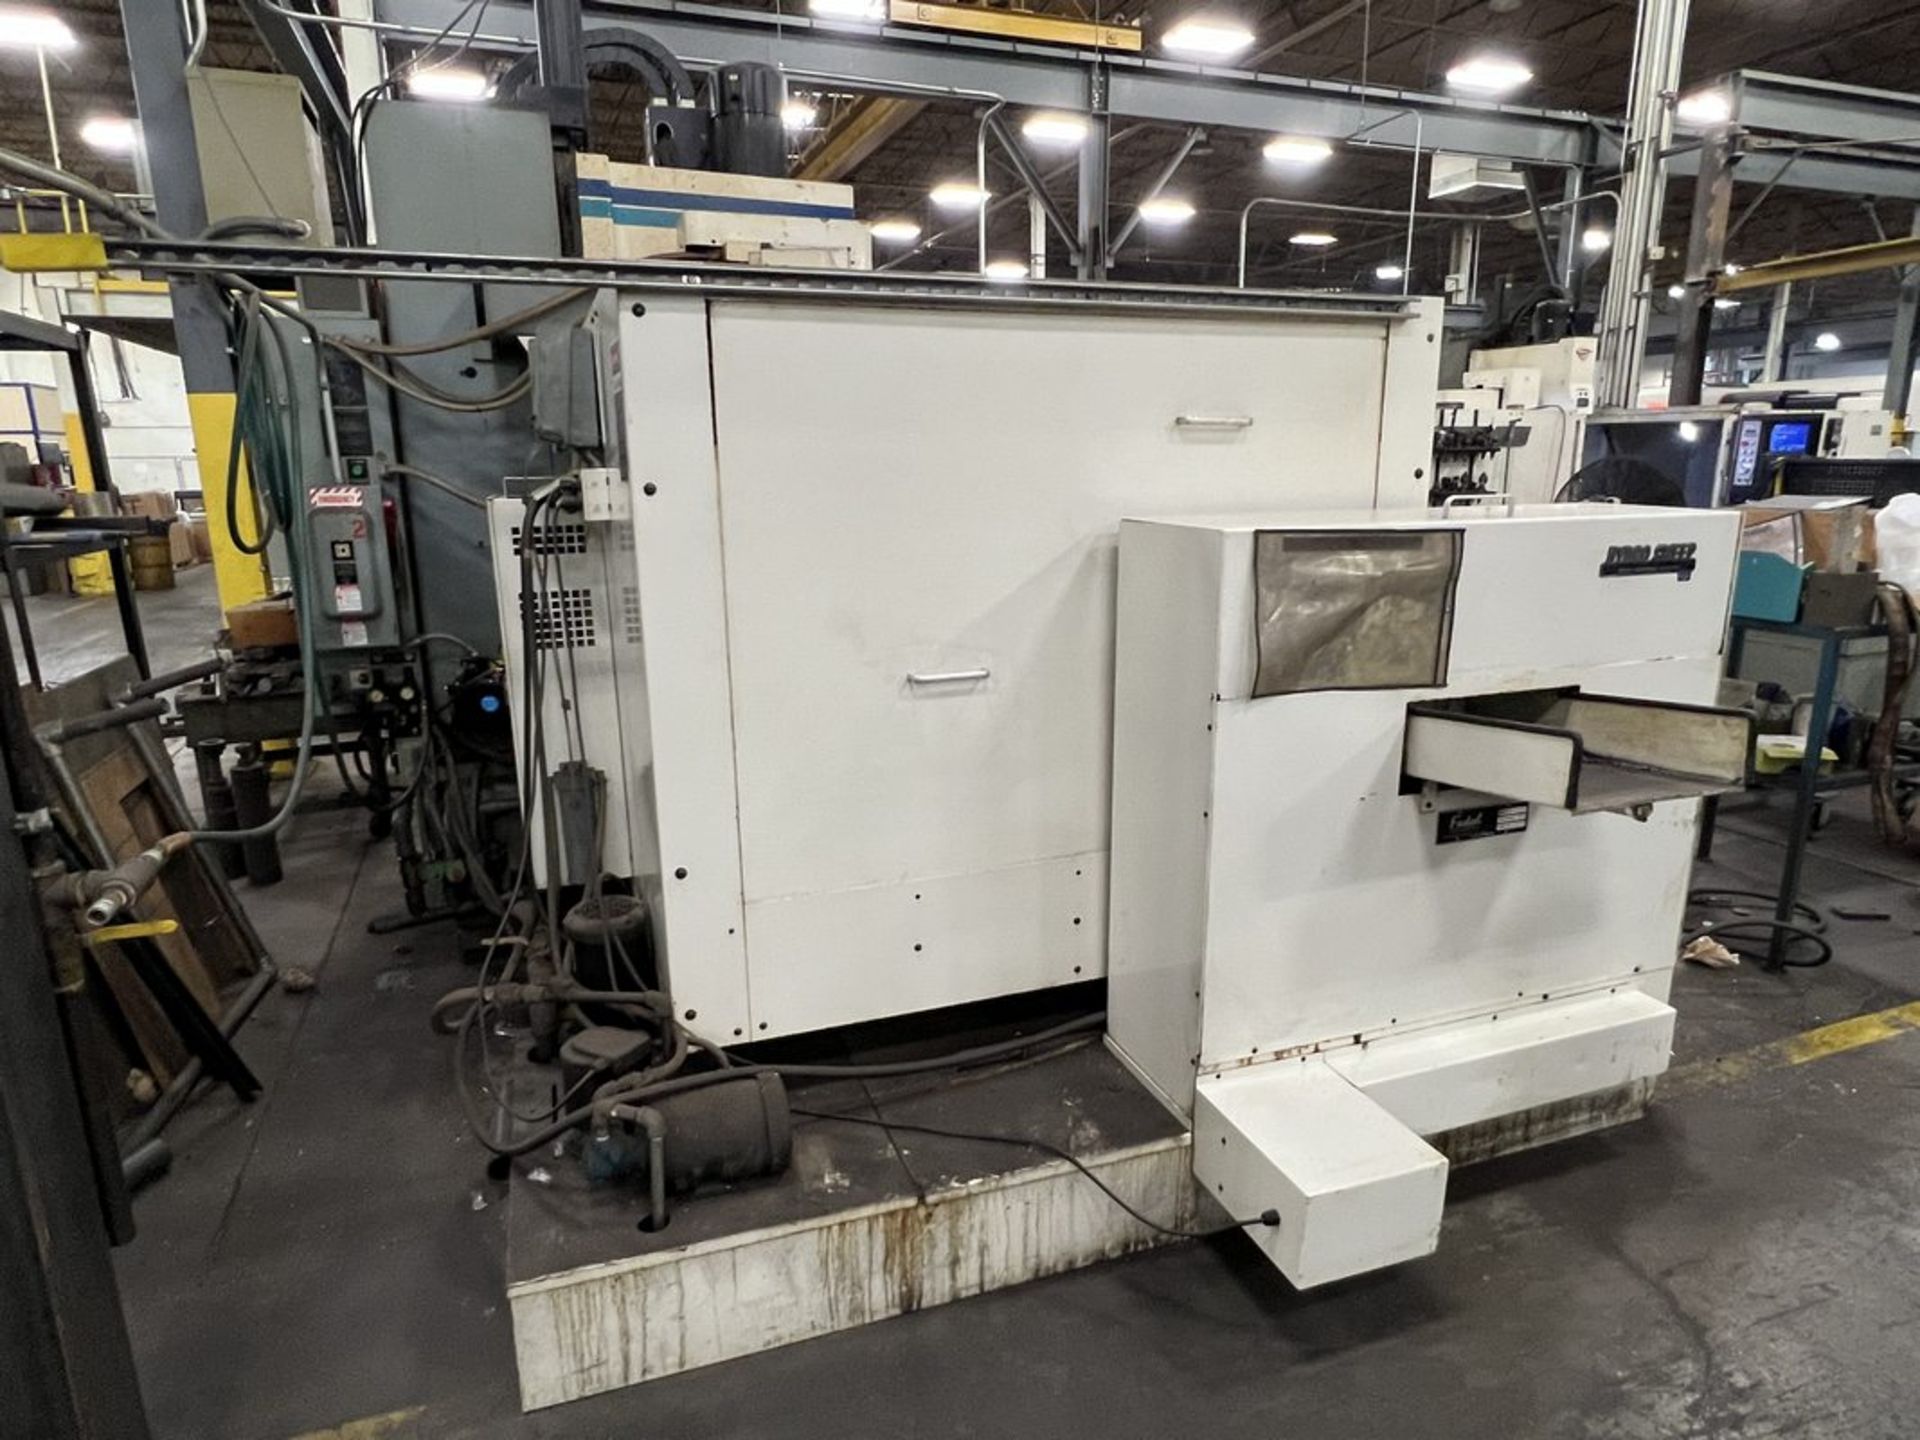 Fadal VMC6030HT 4-Axis CNC Vertical Machining Center, S/N 9803609, 1998 - Image 11 of 14